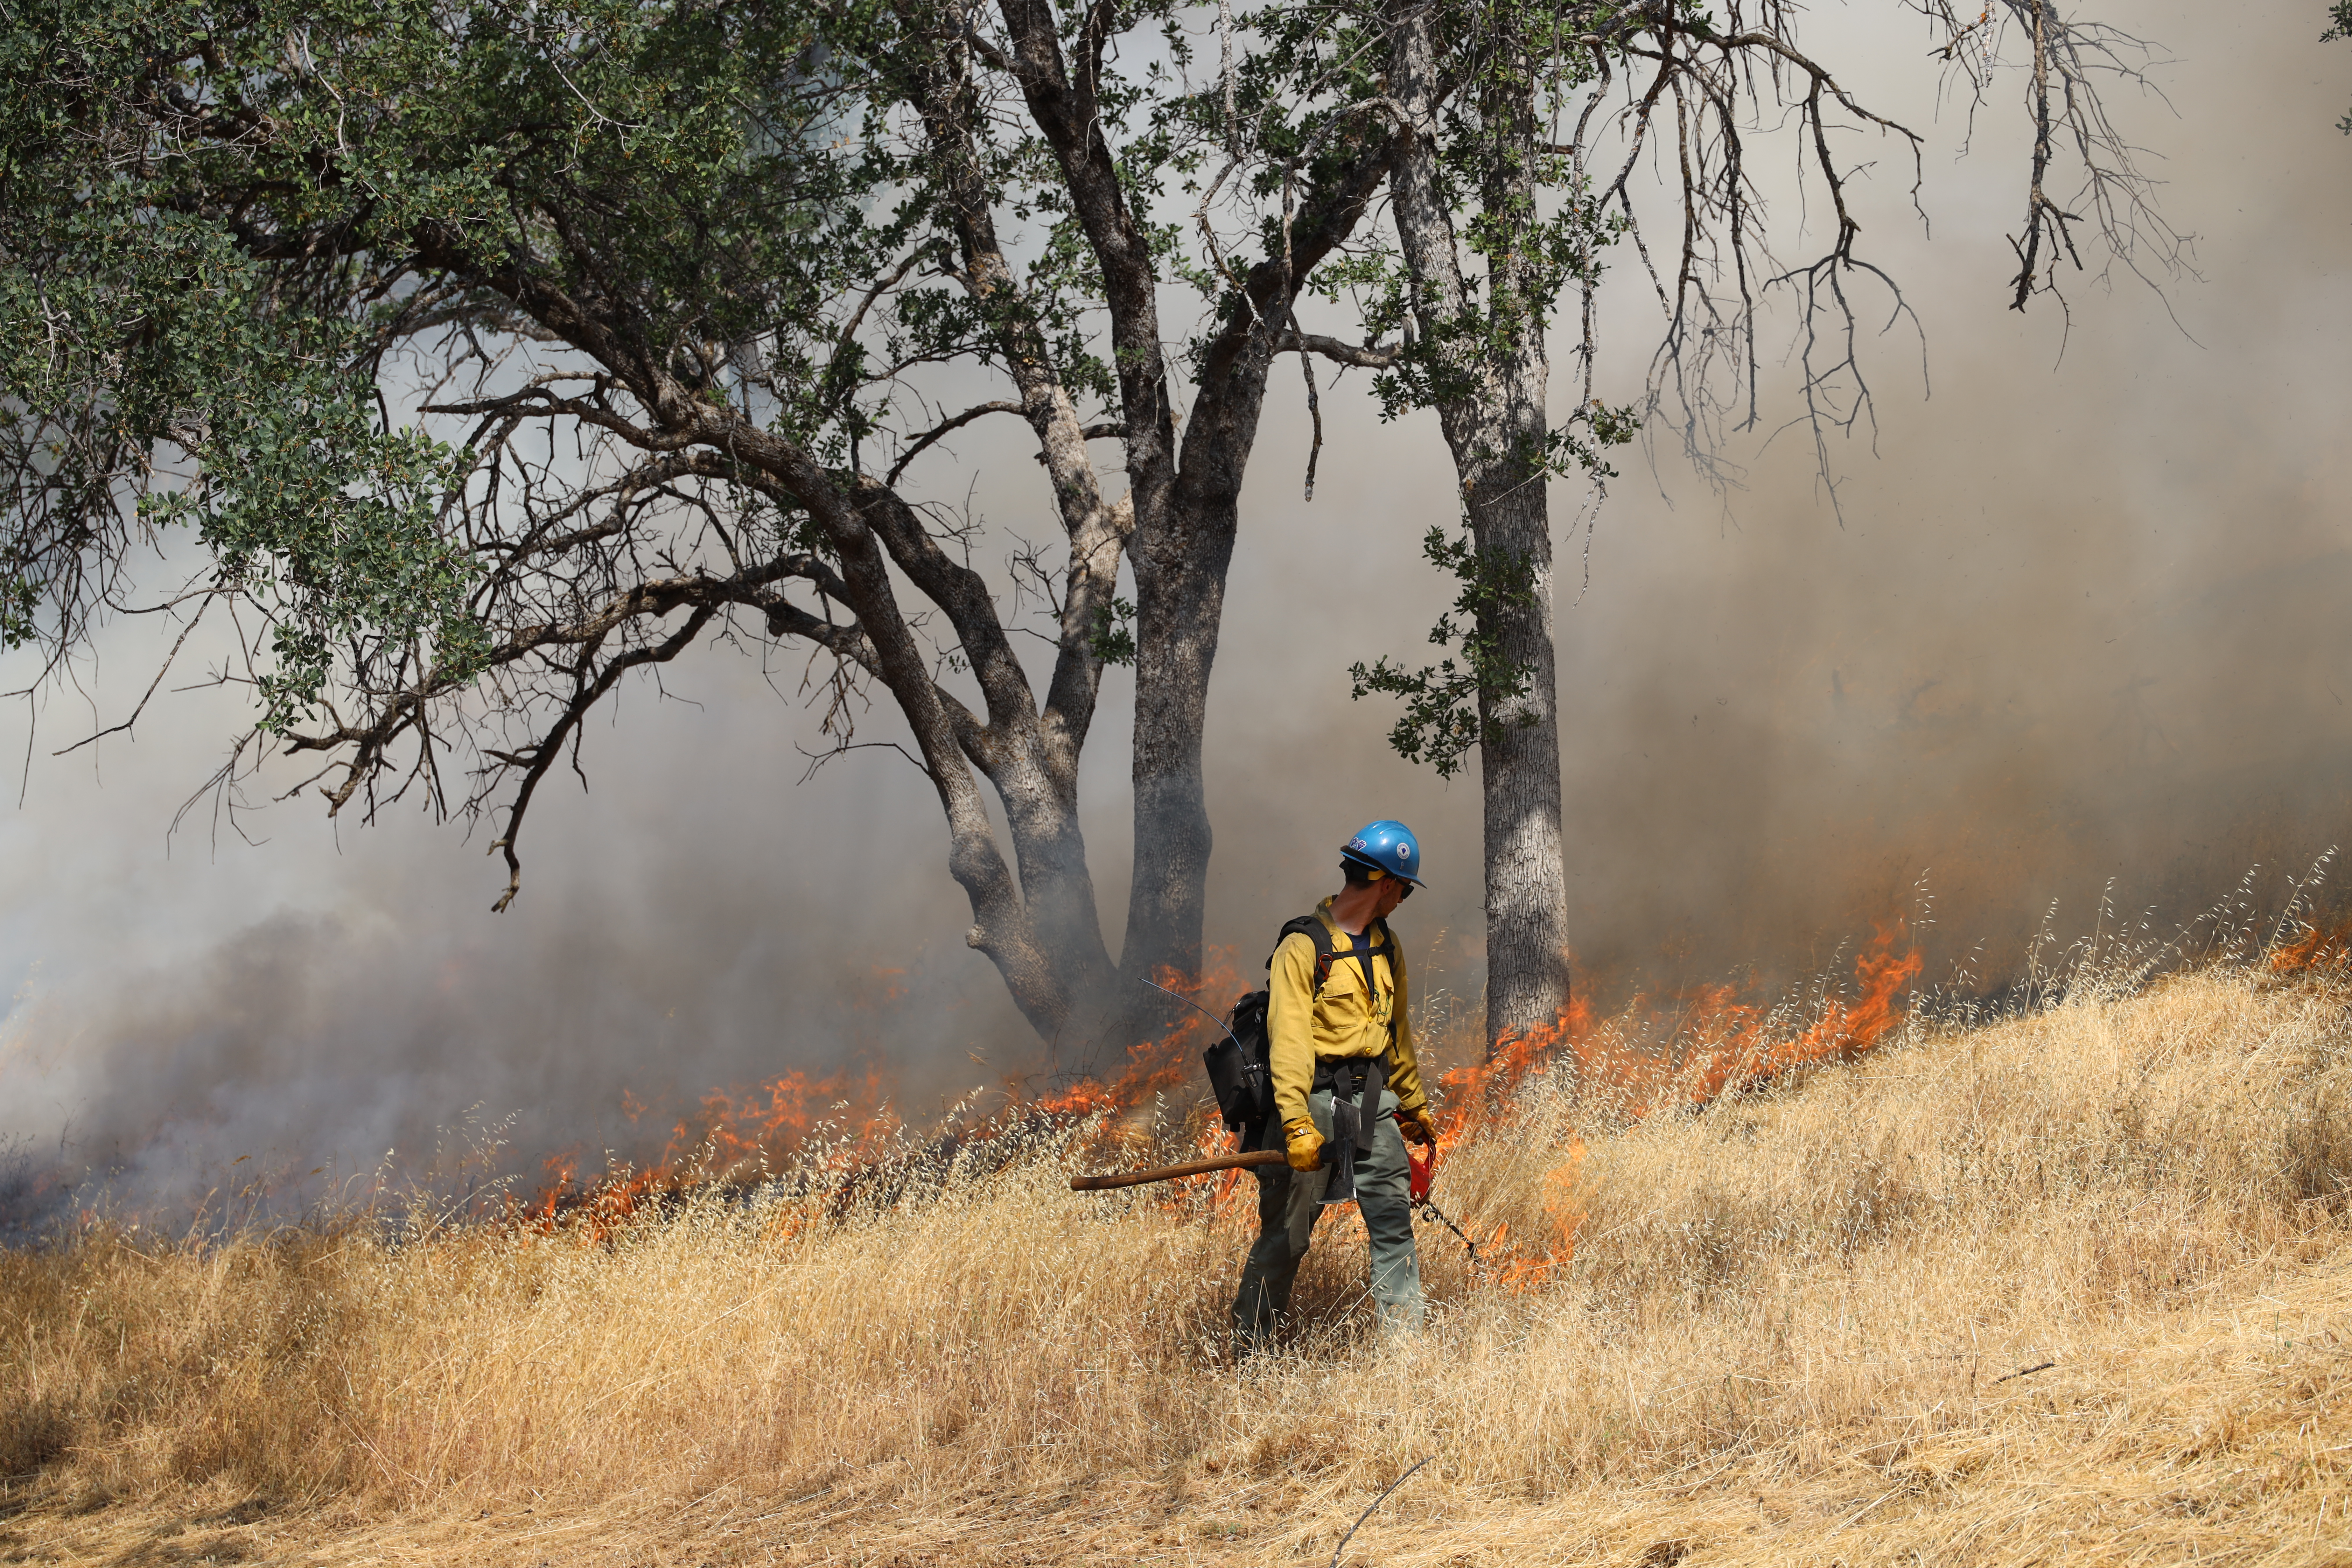 Person in blue hard hat and yellow shirt carrying a metal can with a spigot next to burning grass